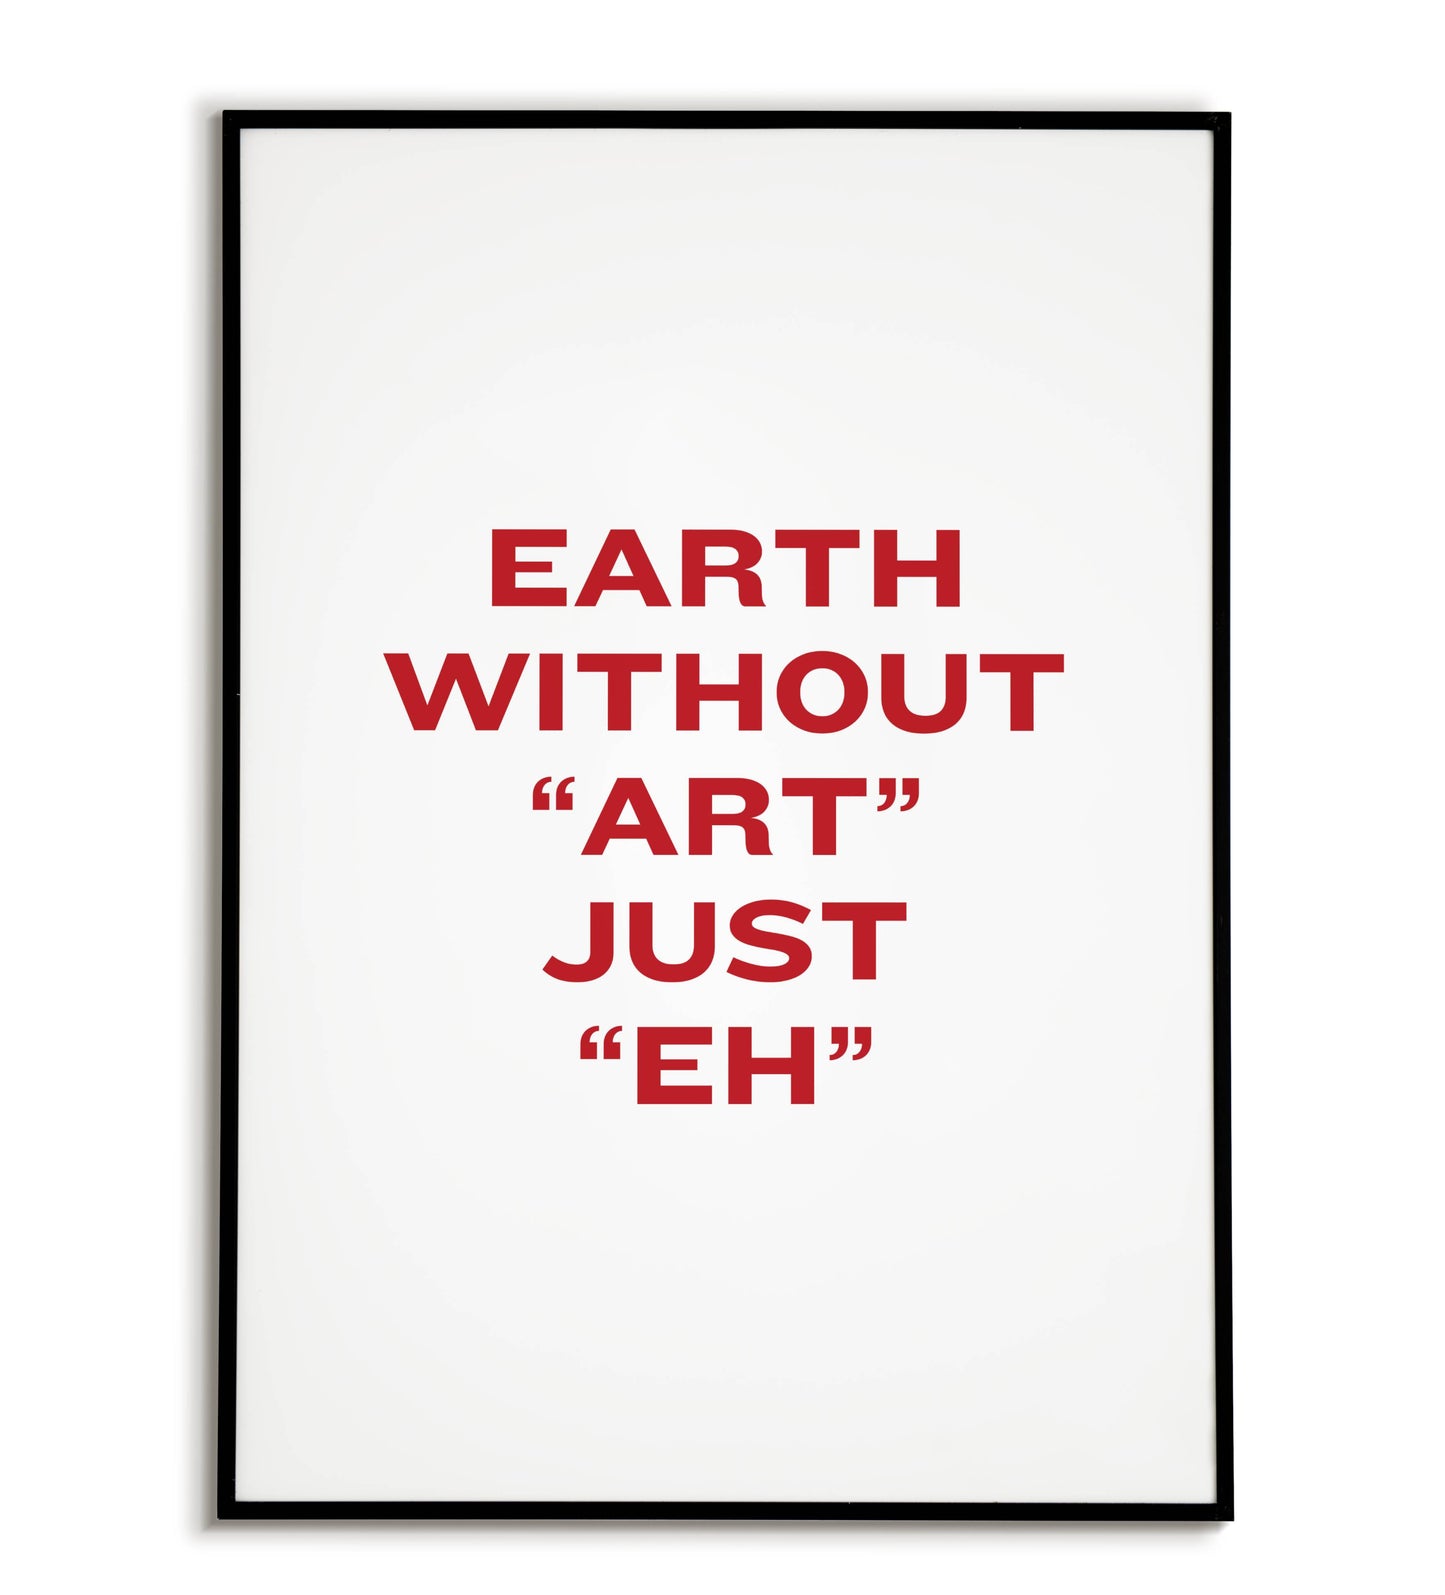 Earth without art is just eh" typographic art quote poster